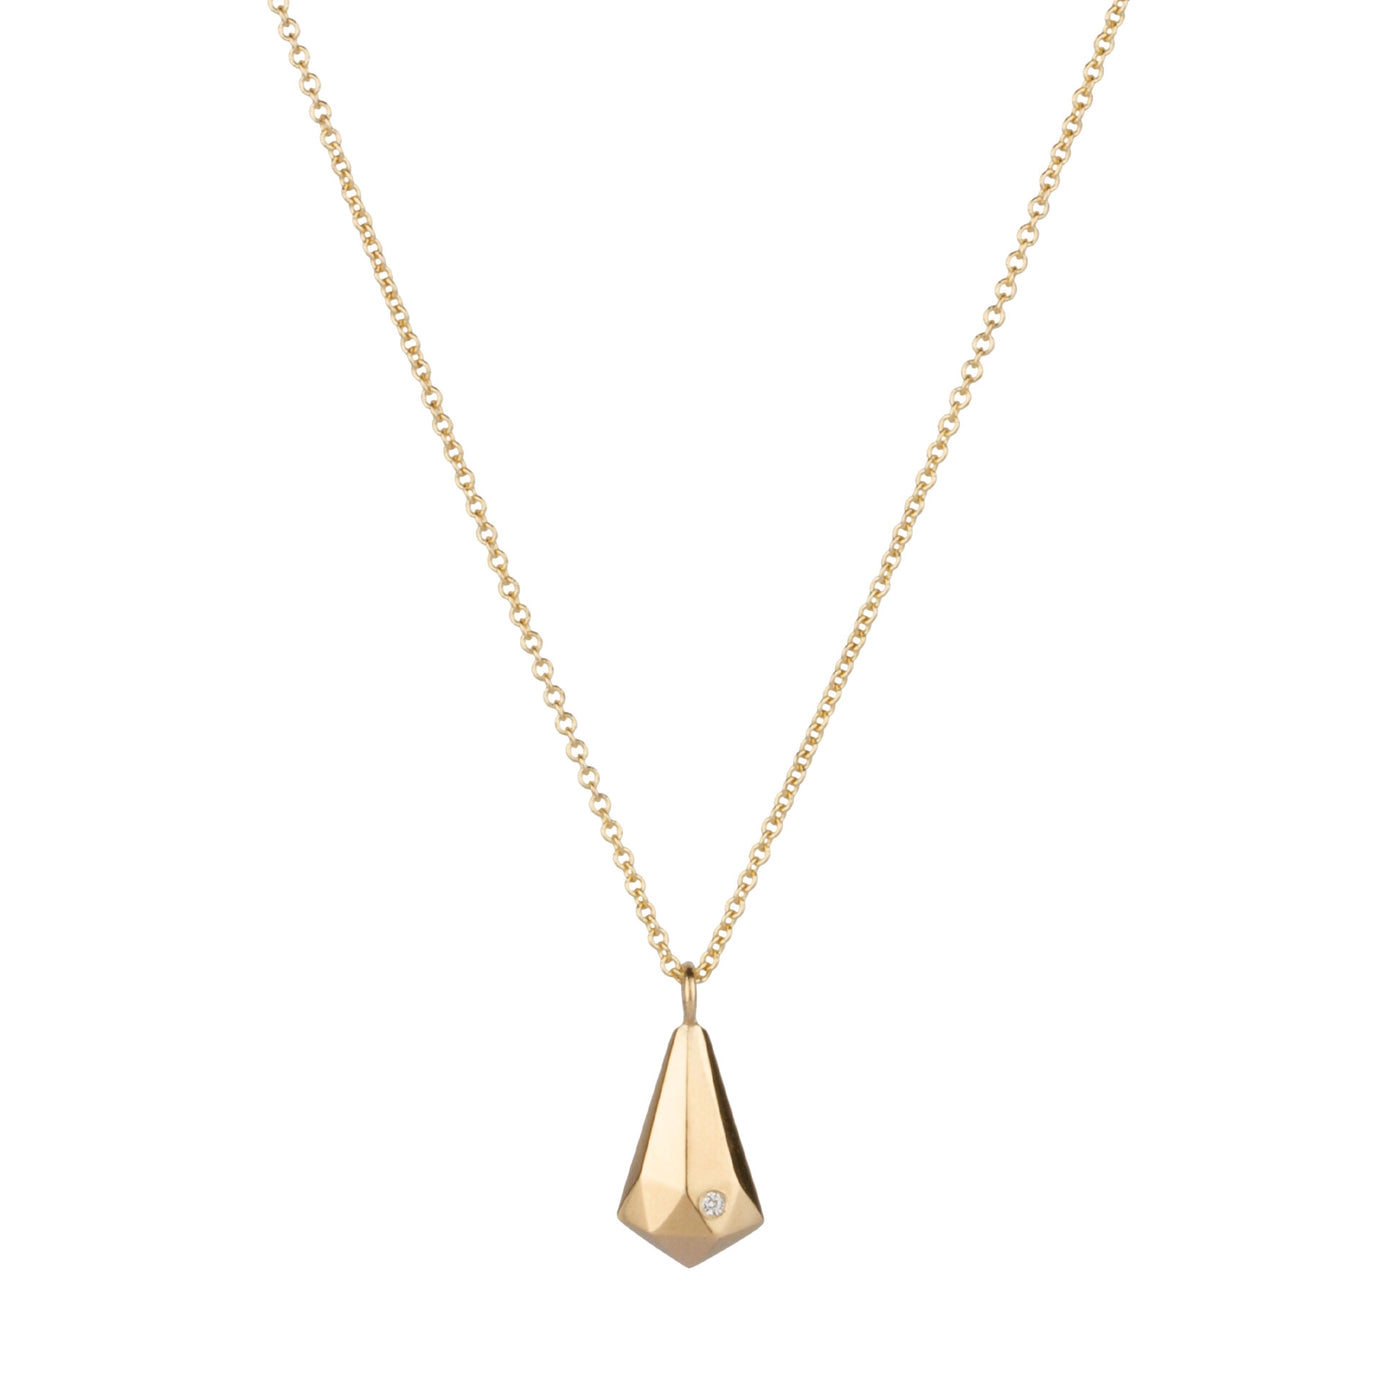 14k yellow gold faceted crystal fragment pendant with a diamond and a gold chain on a white background